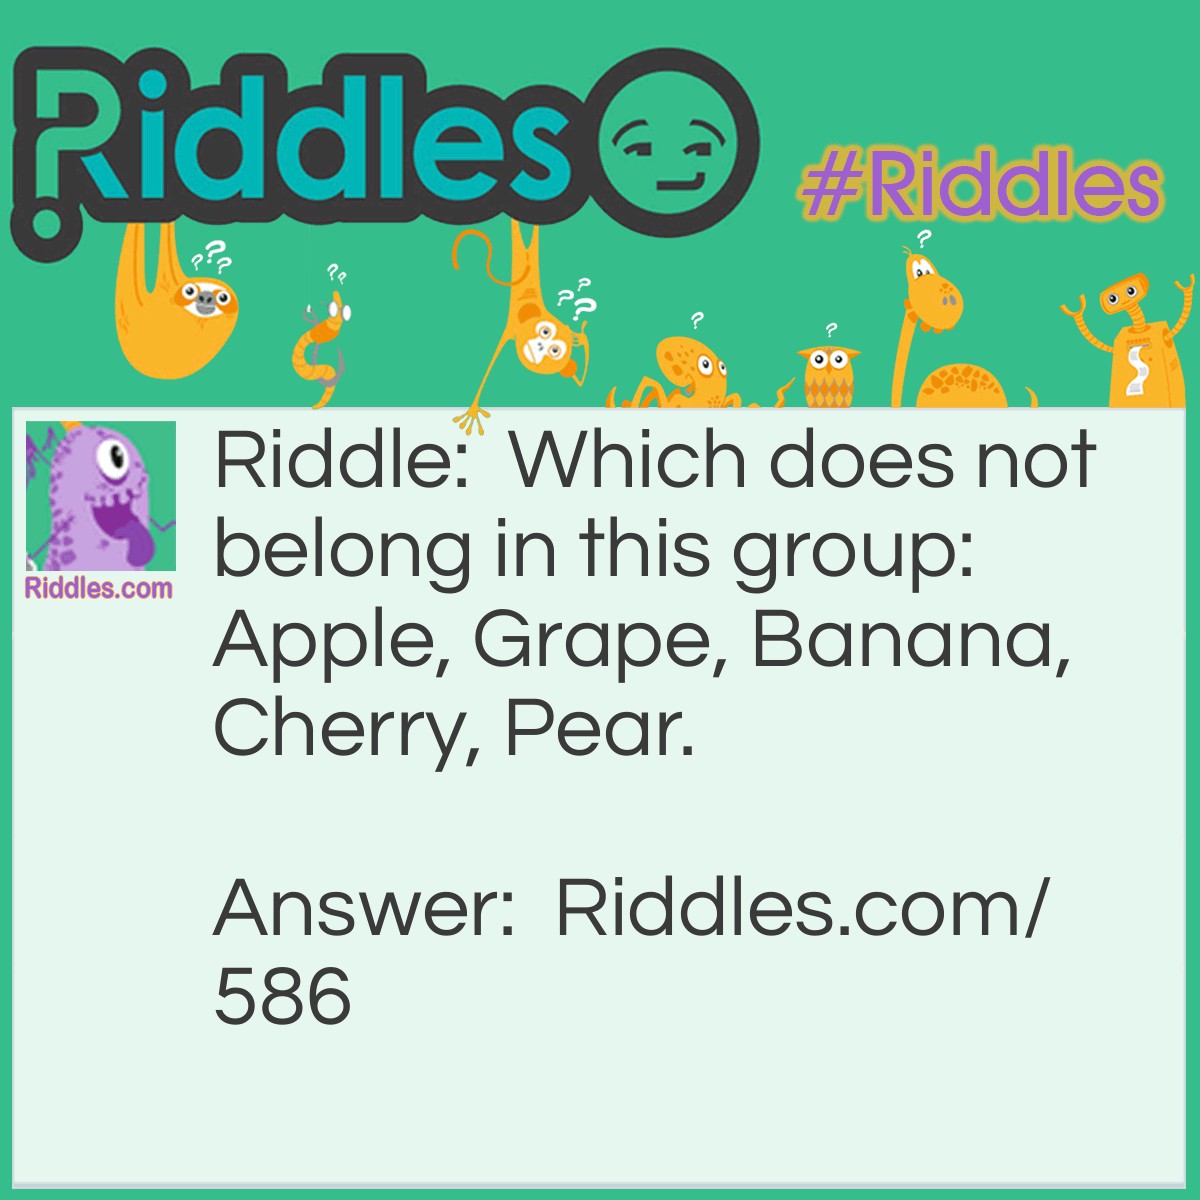 Riddle: Which does not belong in this group: Apple, Grape, Banana, Cherry, Pear? Answer: The Banana. It's the only one that needs peeling before eating.